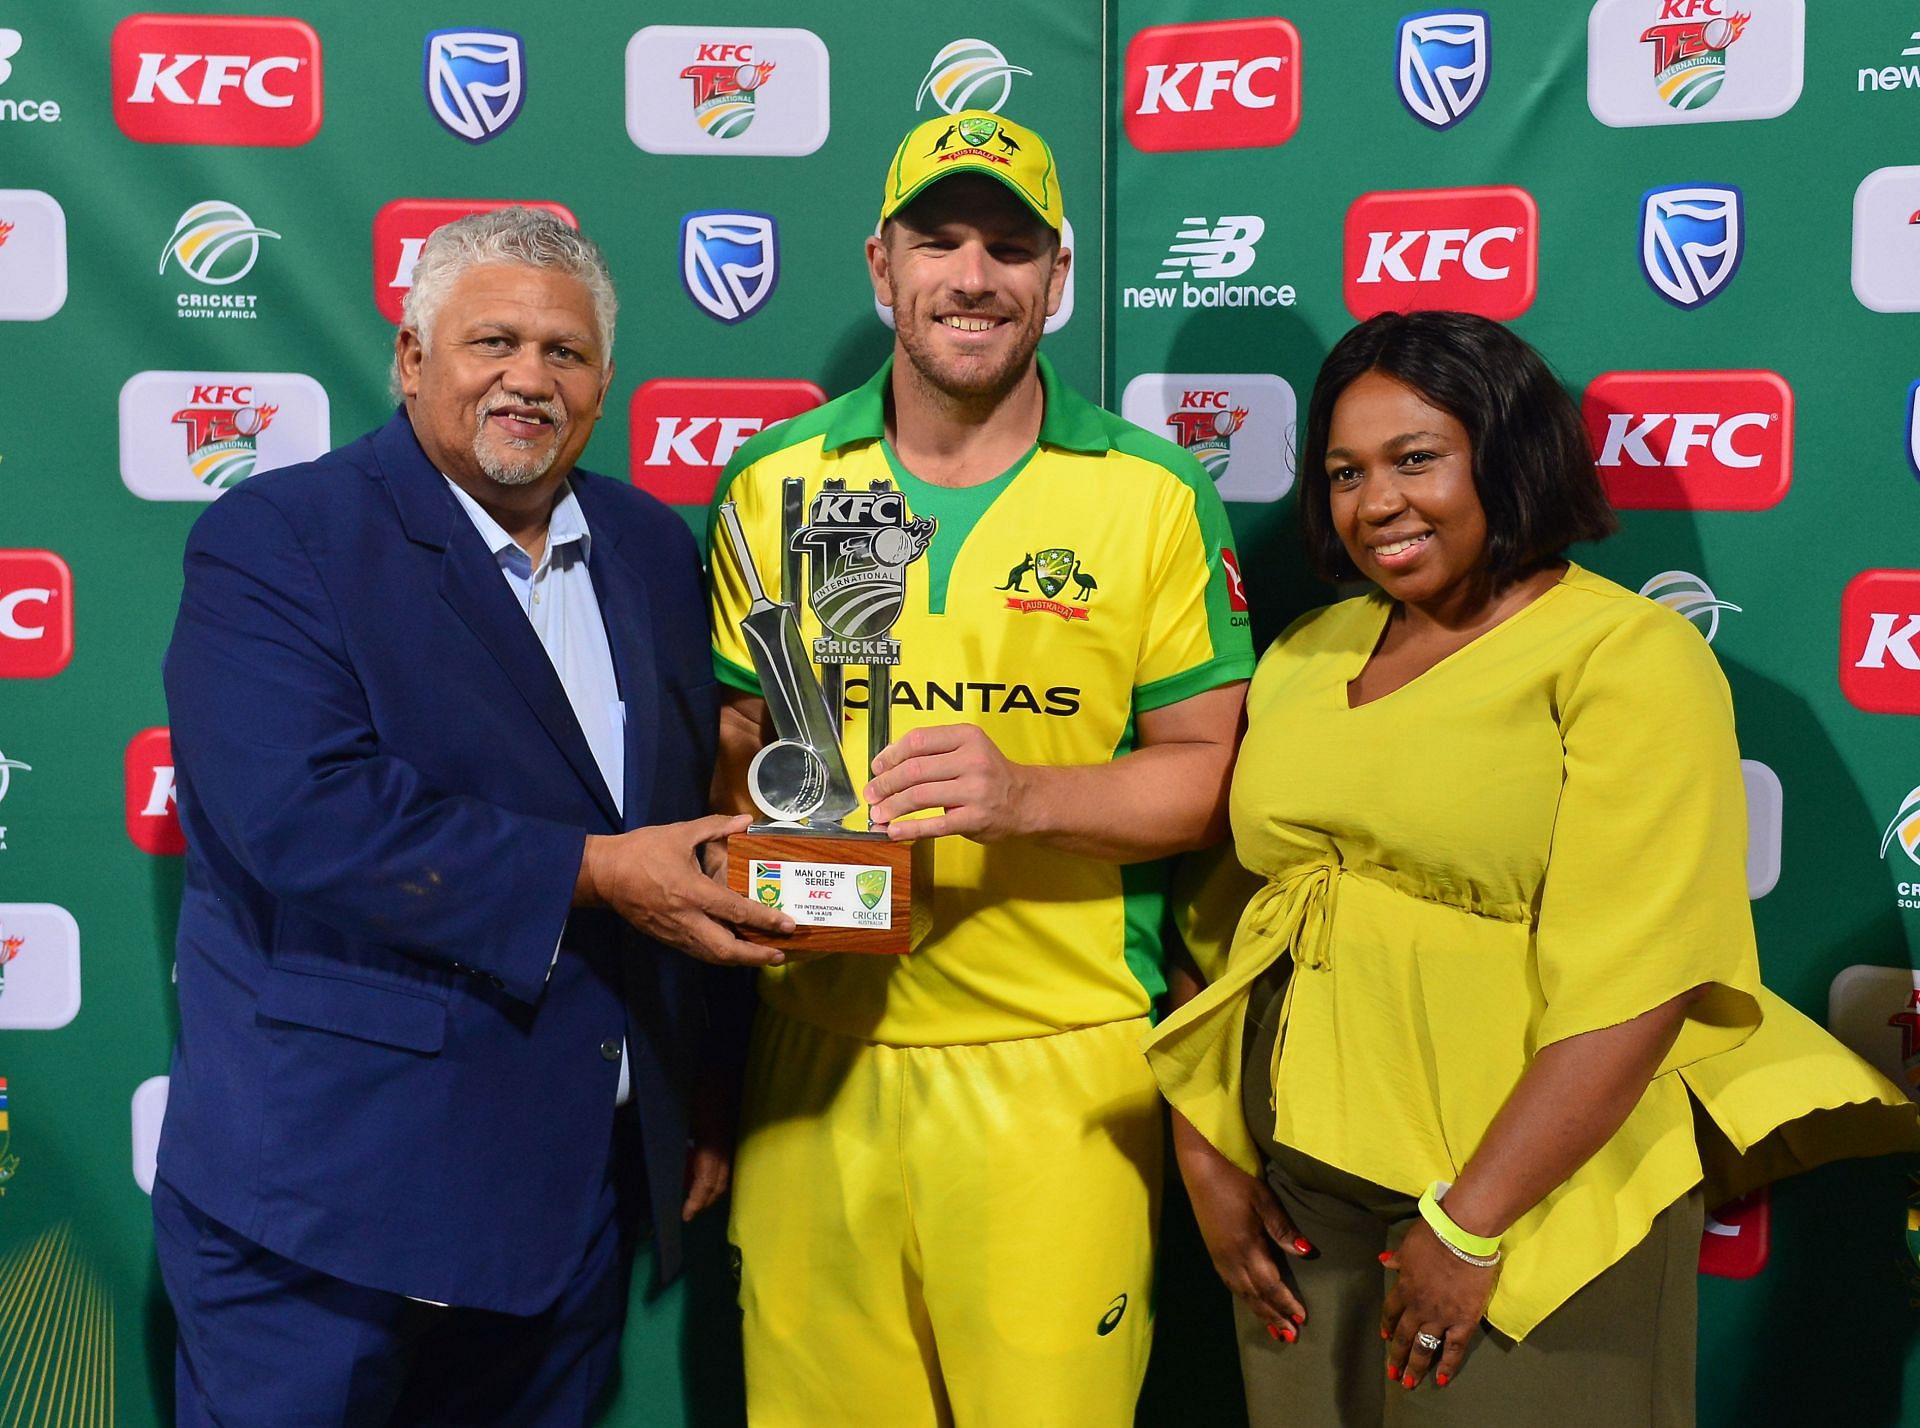 Aaron Finch was the player of the series